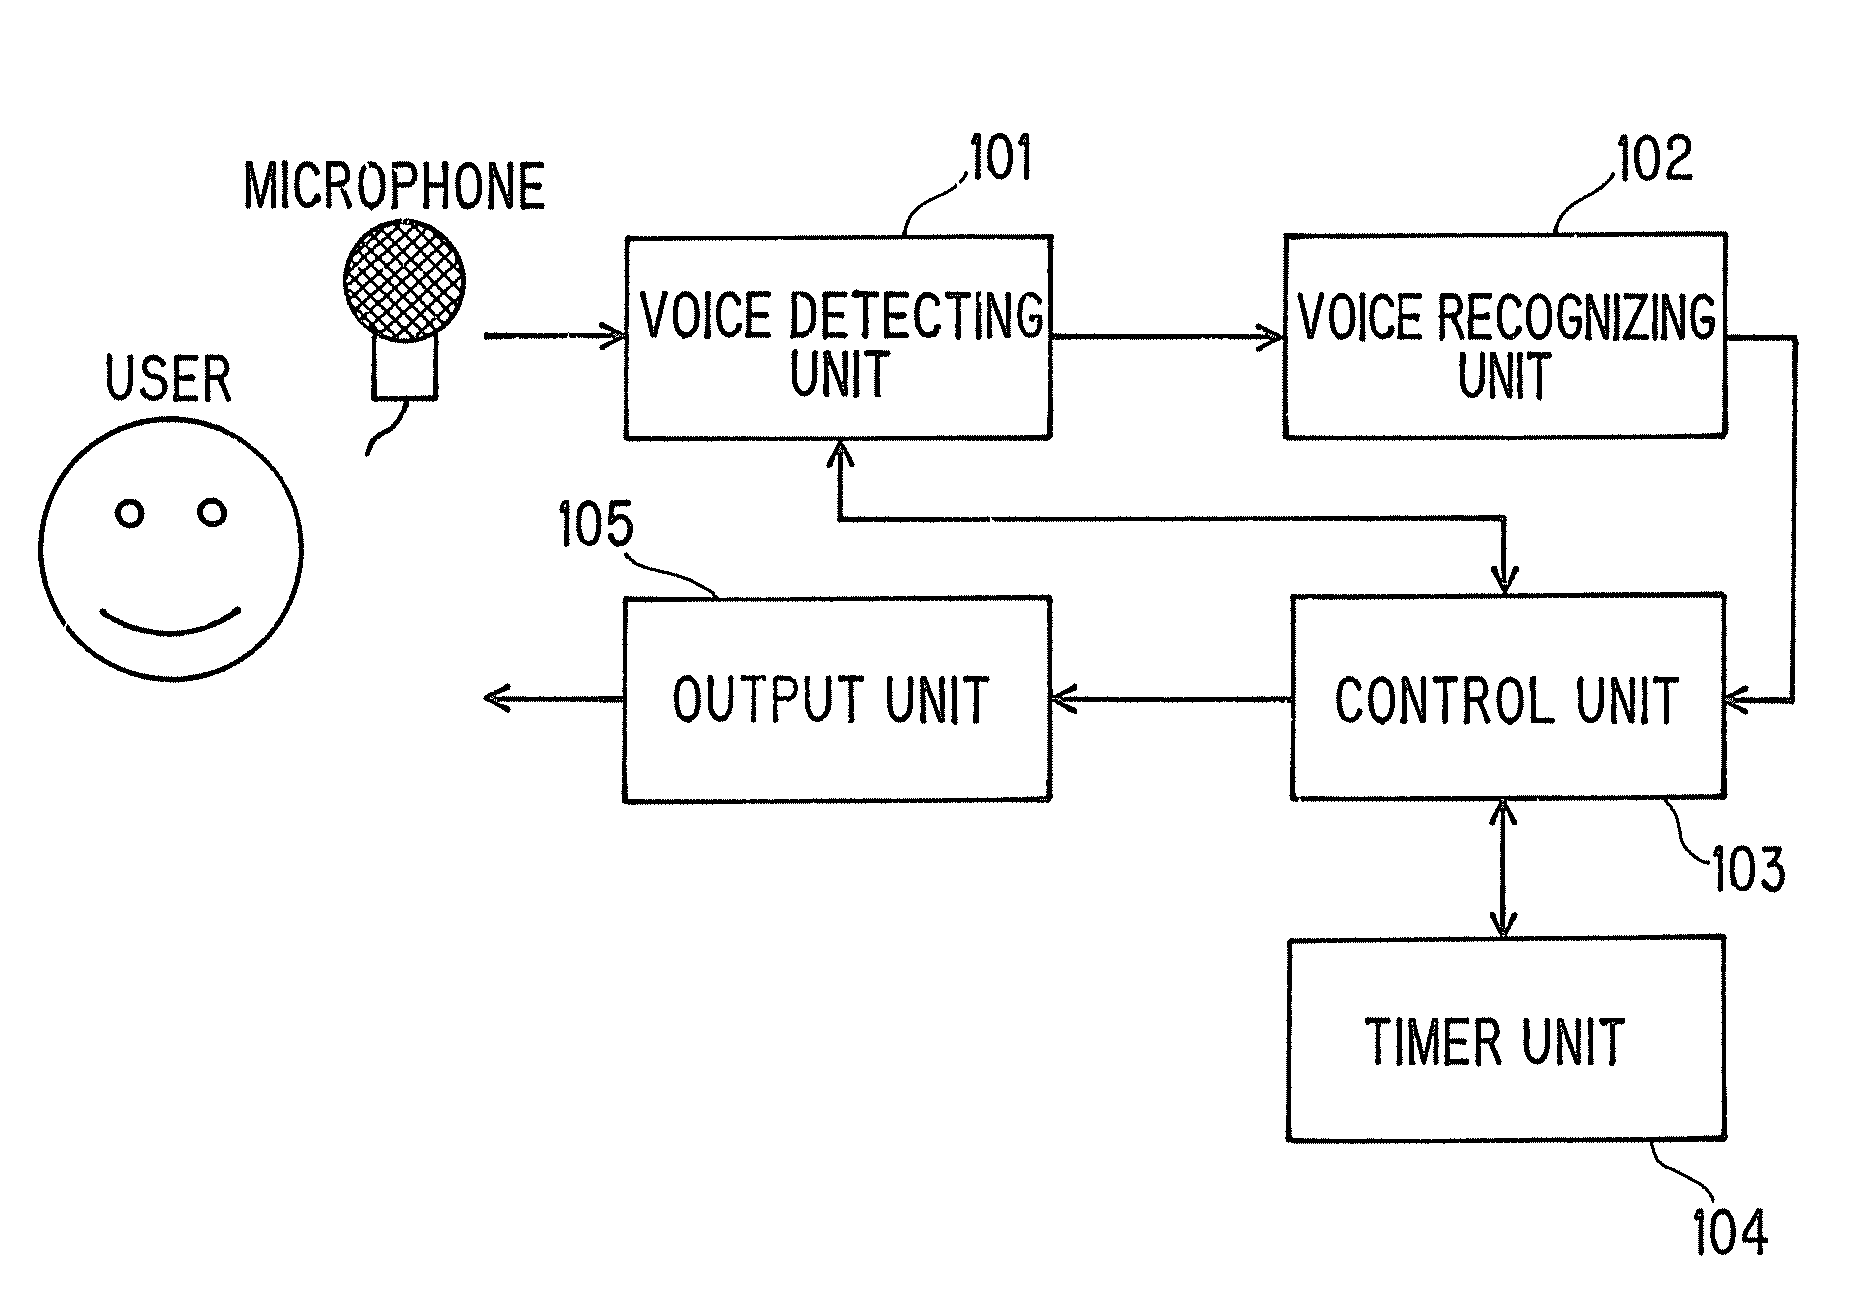 Voice recognition apparatus and method